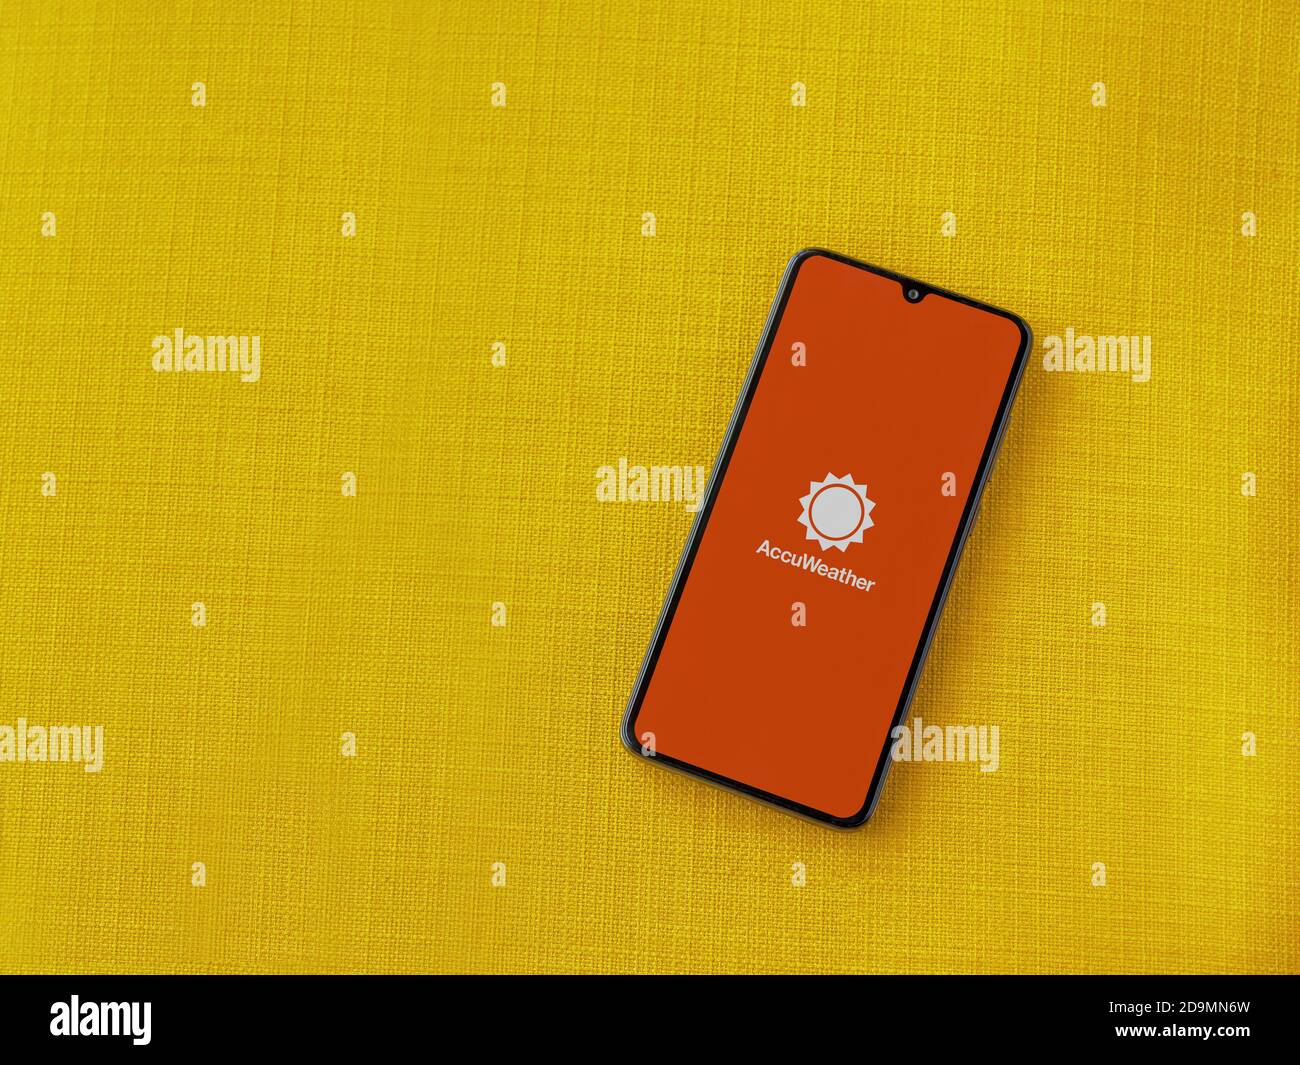 Lod, Israel - July 8, 2020: AccuWeather app launch screen with logo on the display of a black mobile smartphone on a yellow fabric background. Top vie Stock Photo